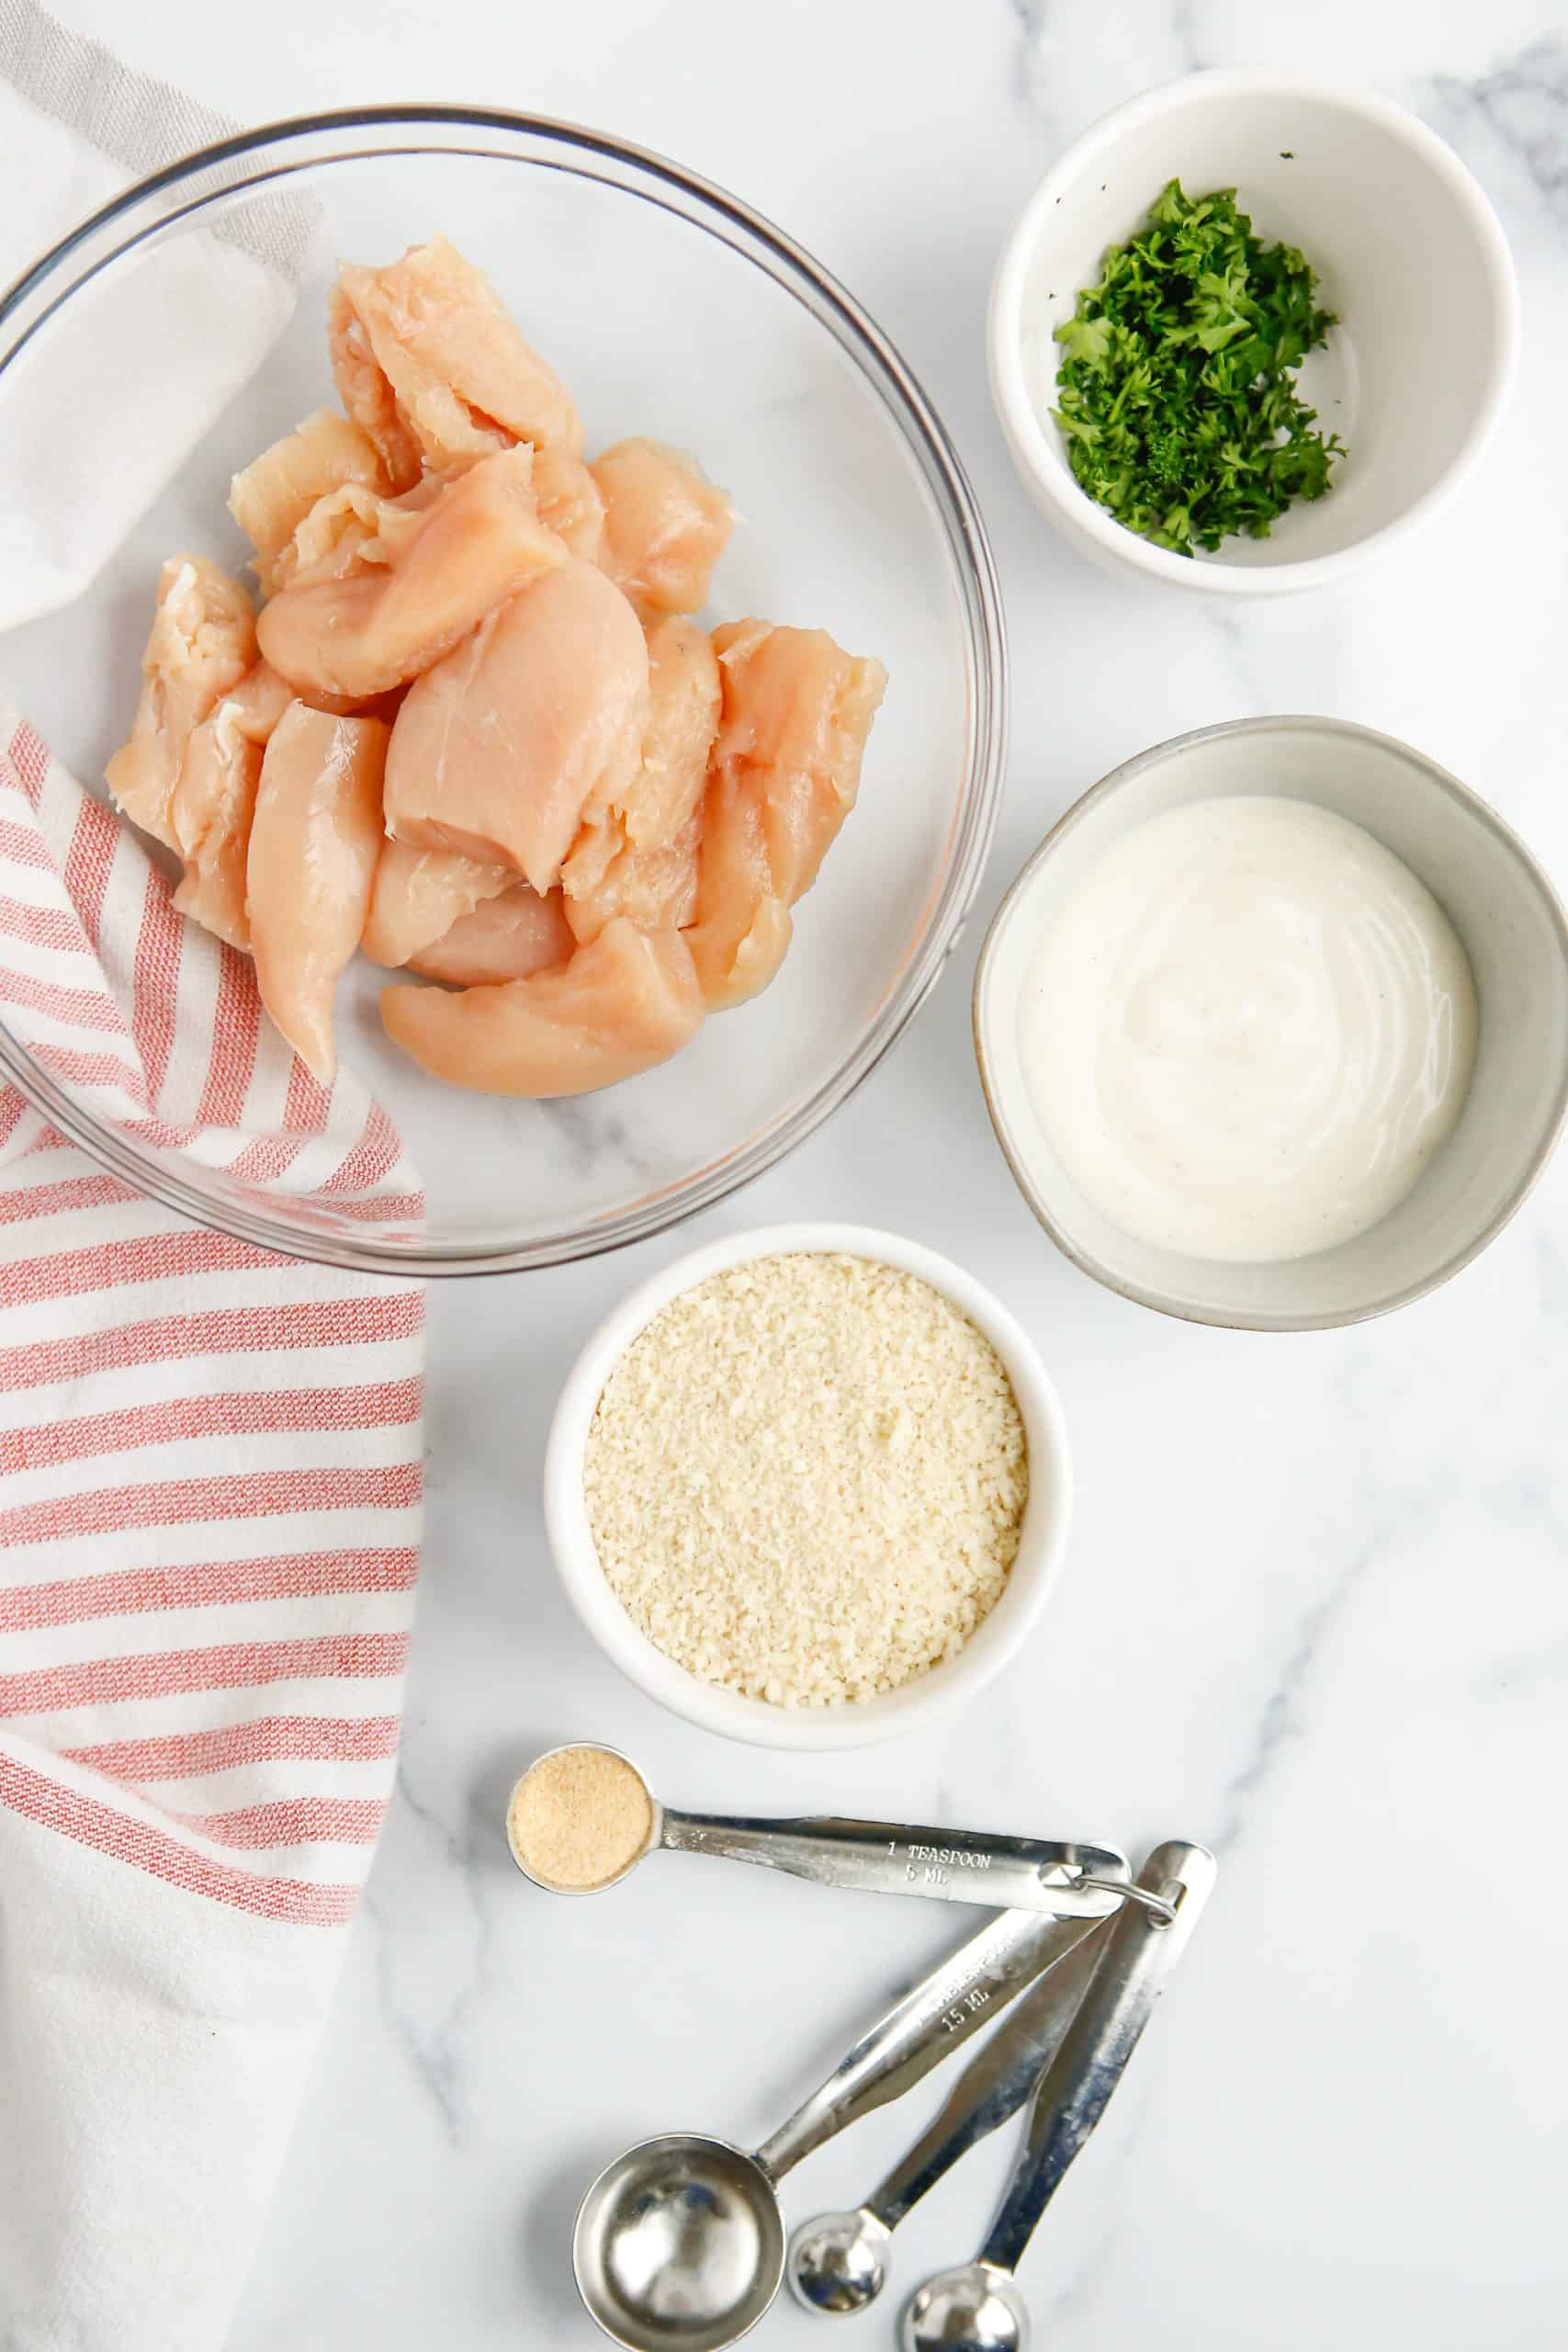 Ingredients needed to make Easy Baked Ranch Chicken Nuggets: diced chicken breasts, Panko breadcrumbs, ranch dressing, parsley and garlic powder.